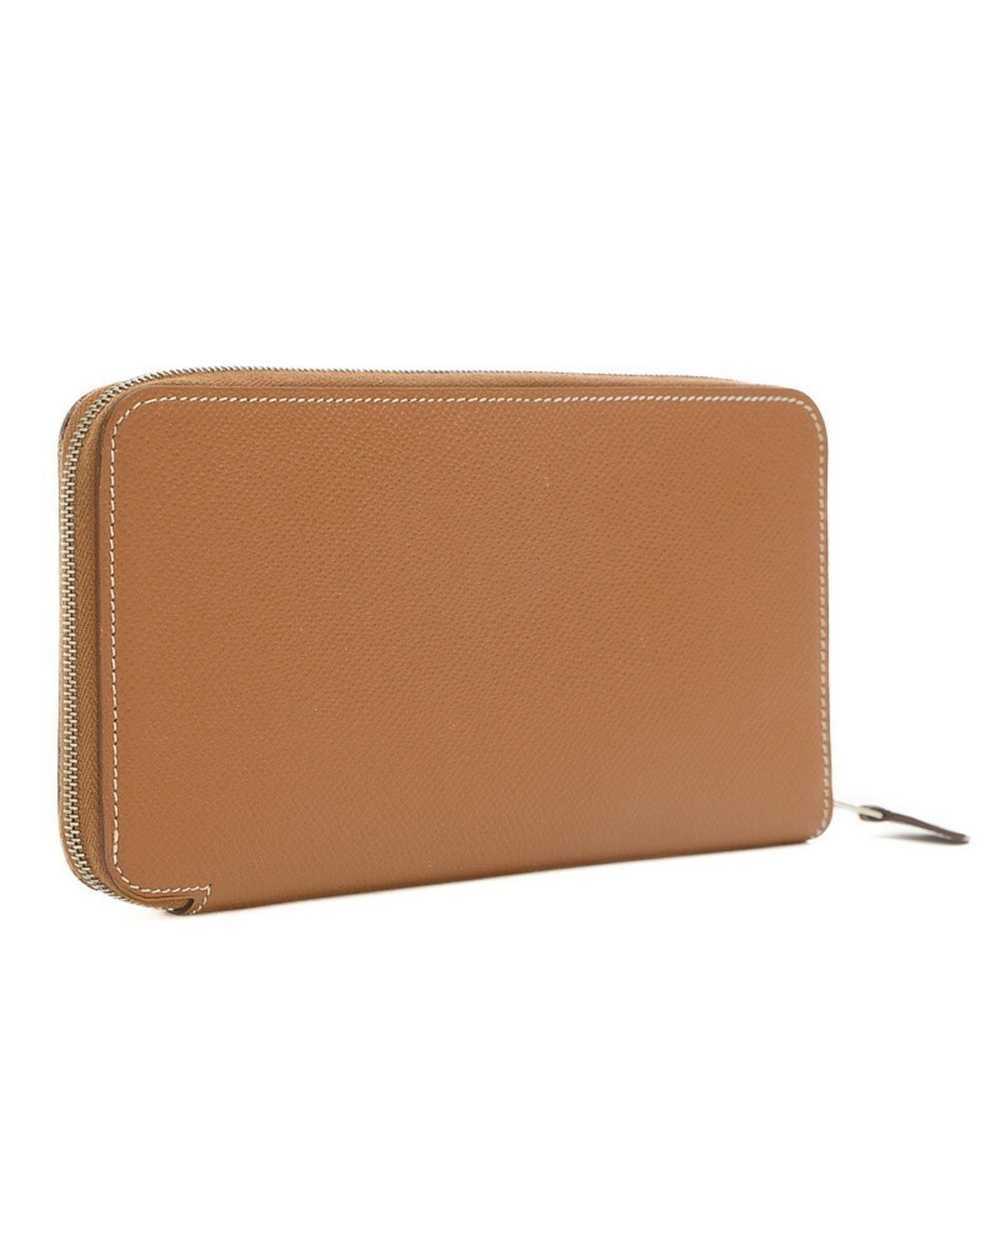 Hermes Classic Leather Wallet with Timeless Desig… - image 2